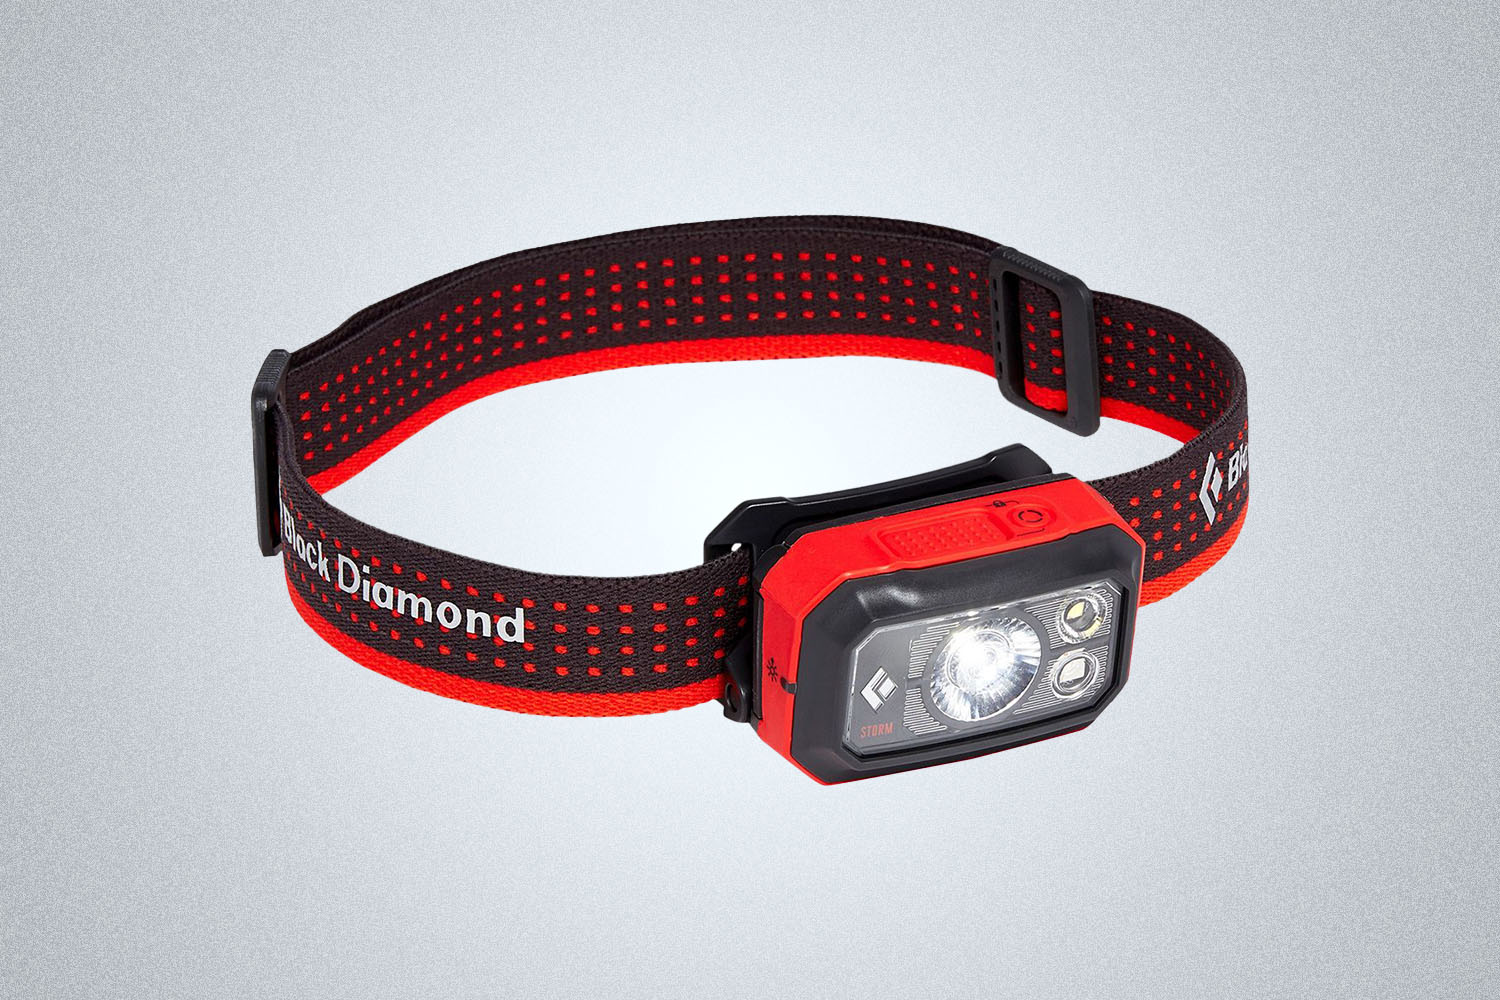 a red and balck headlamp from black diamond on a grey background